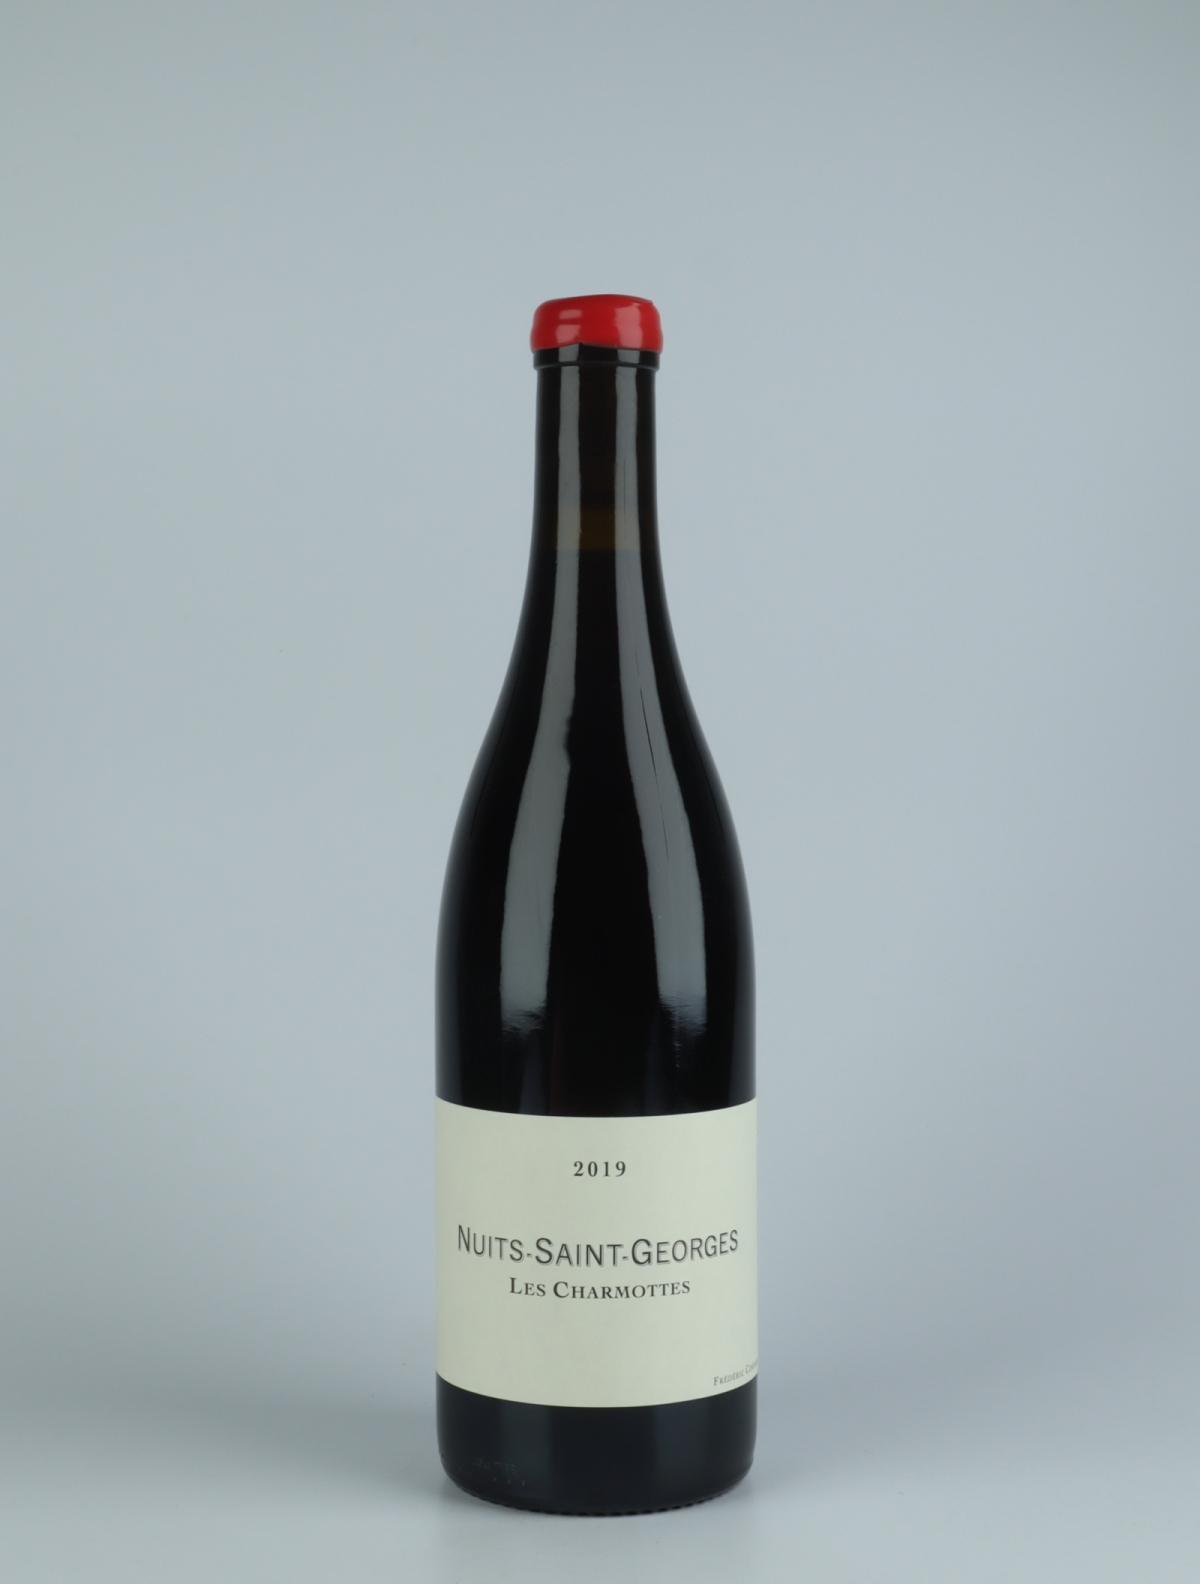 A bottle 2019 Nuits Saint Georges - Les Charmottes - Qvevris Red wine from Frédéric Cossard, Burgundy in France